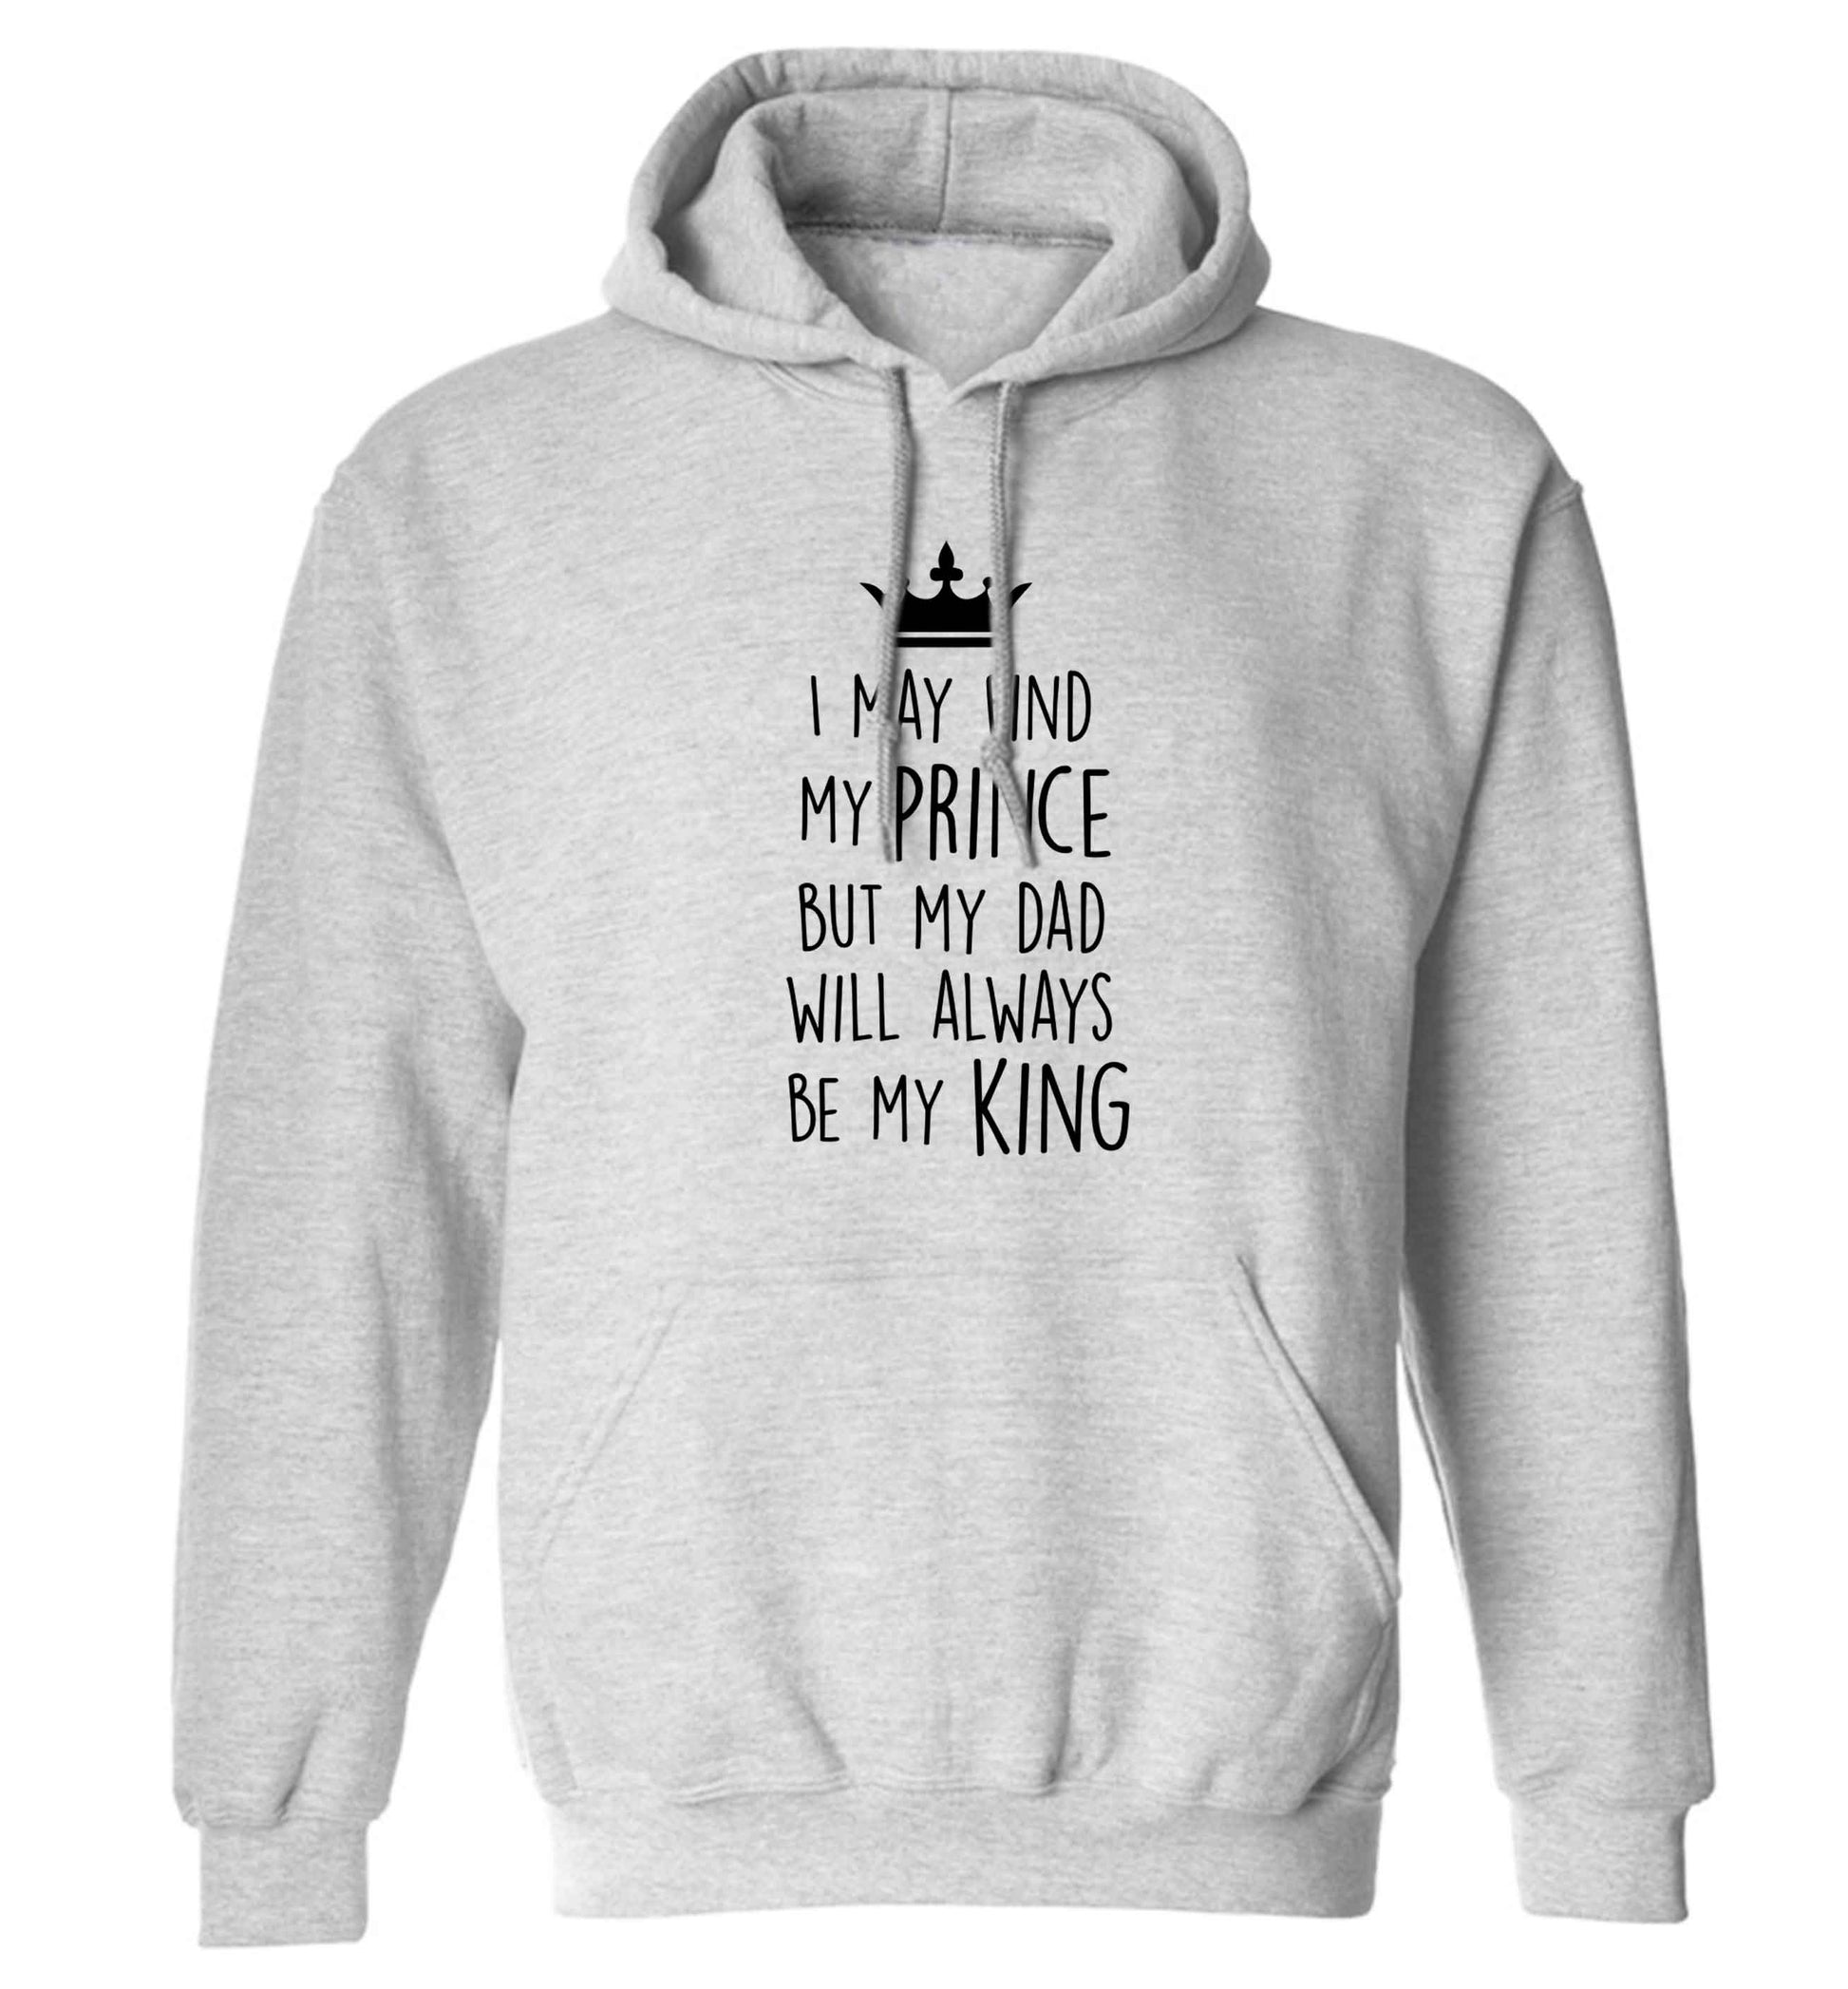 I may find my prince but my dad will always be my king adults unisex grey hoodie 2XL